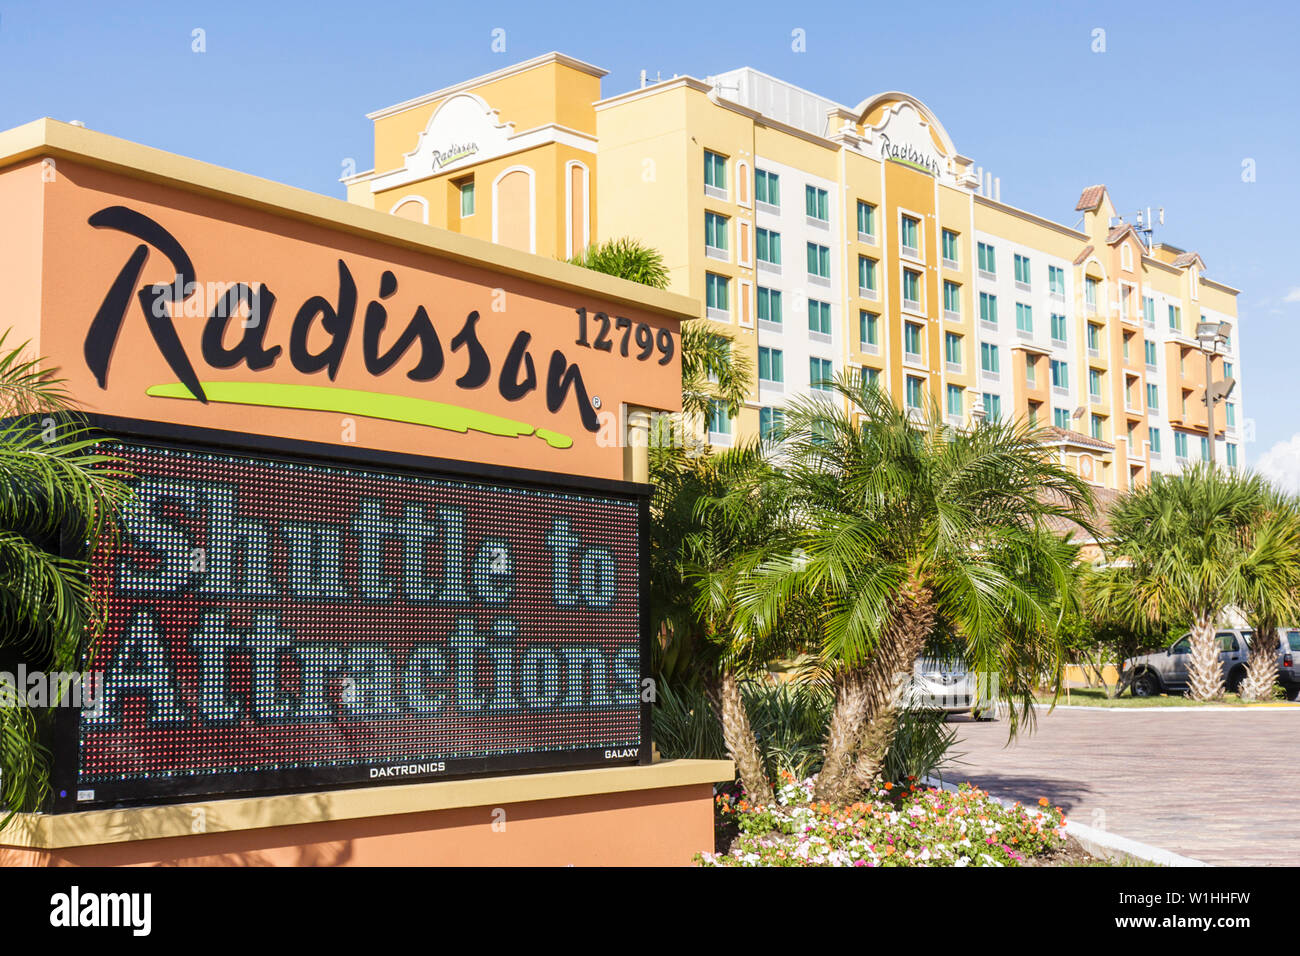 Orlando Florida,Buena Vista,Radisson,hotel,family families parent parents child children,suites,hospitality industry,global company,outside exterior,f Stock Photo